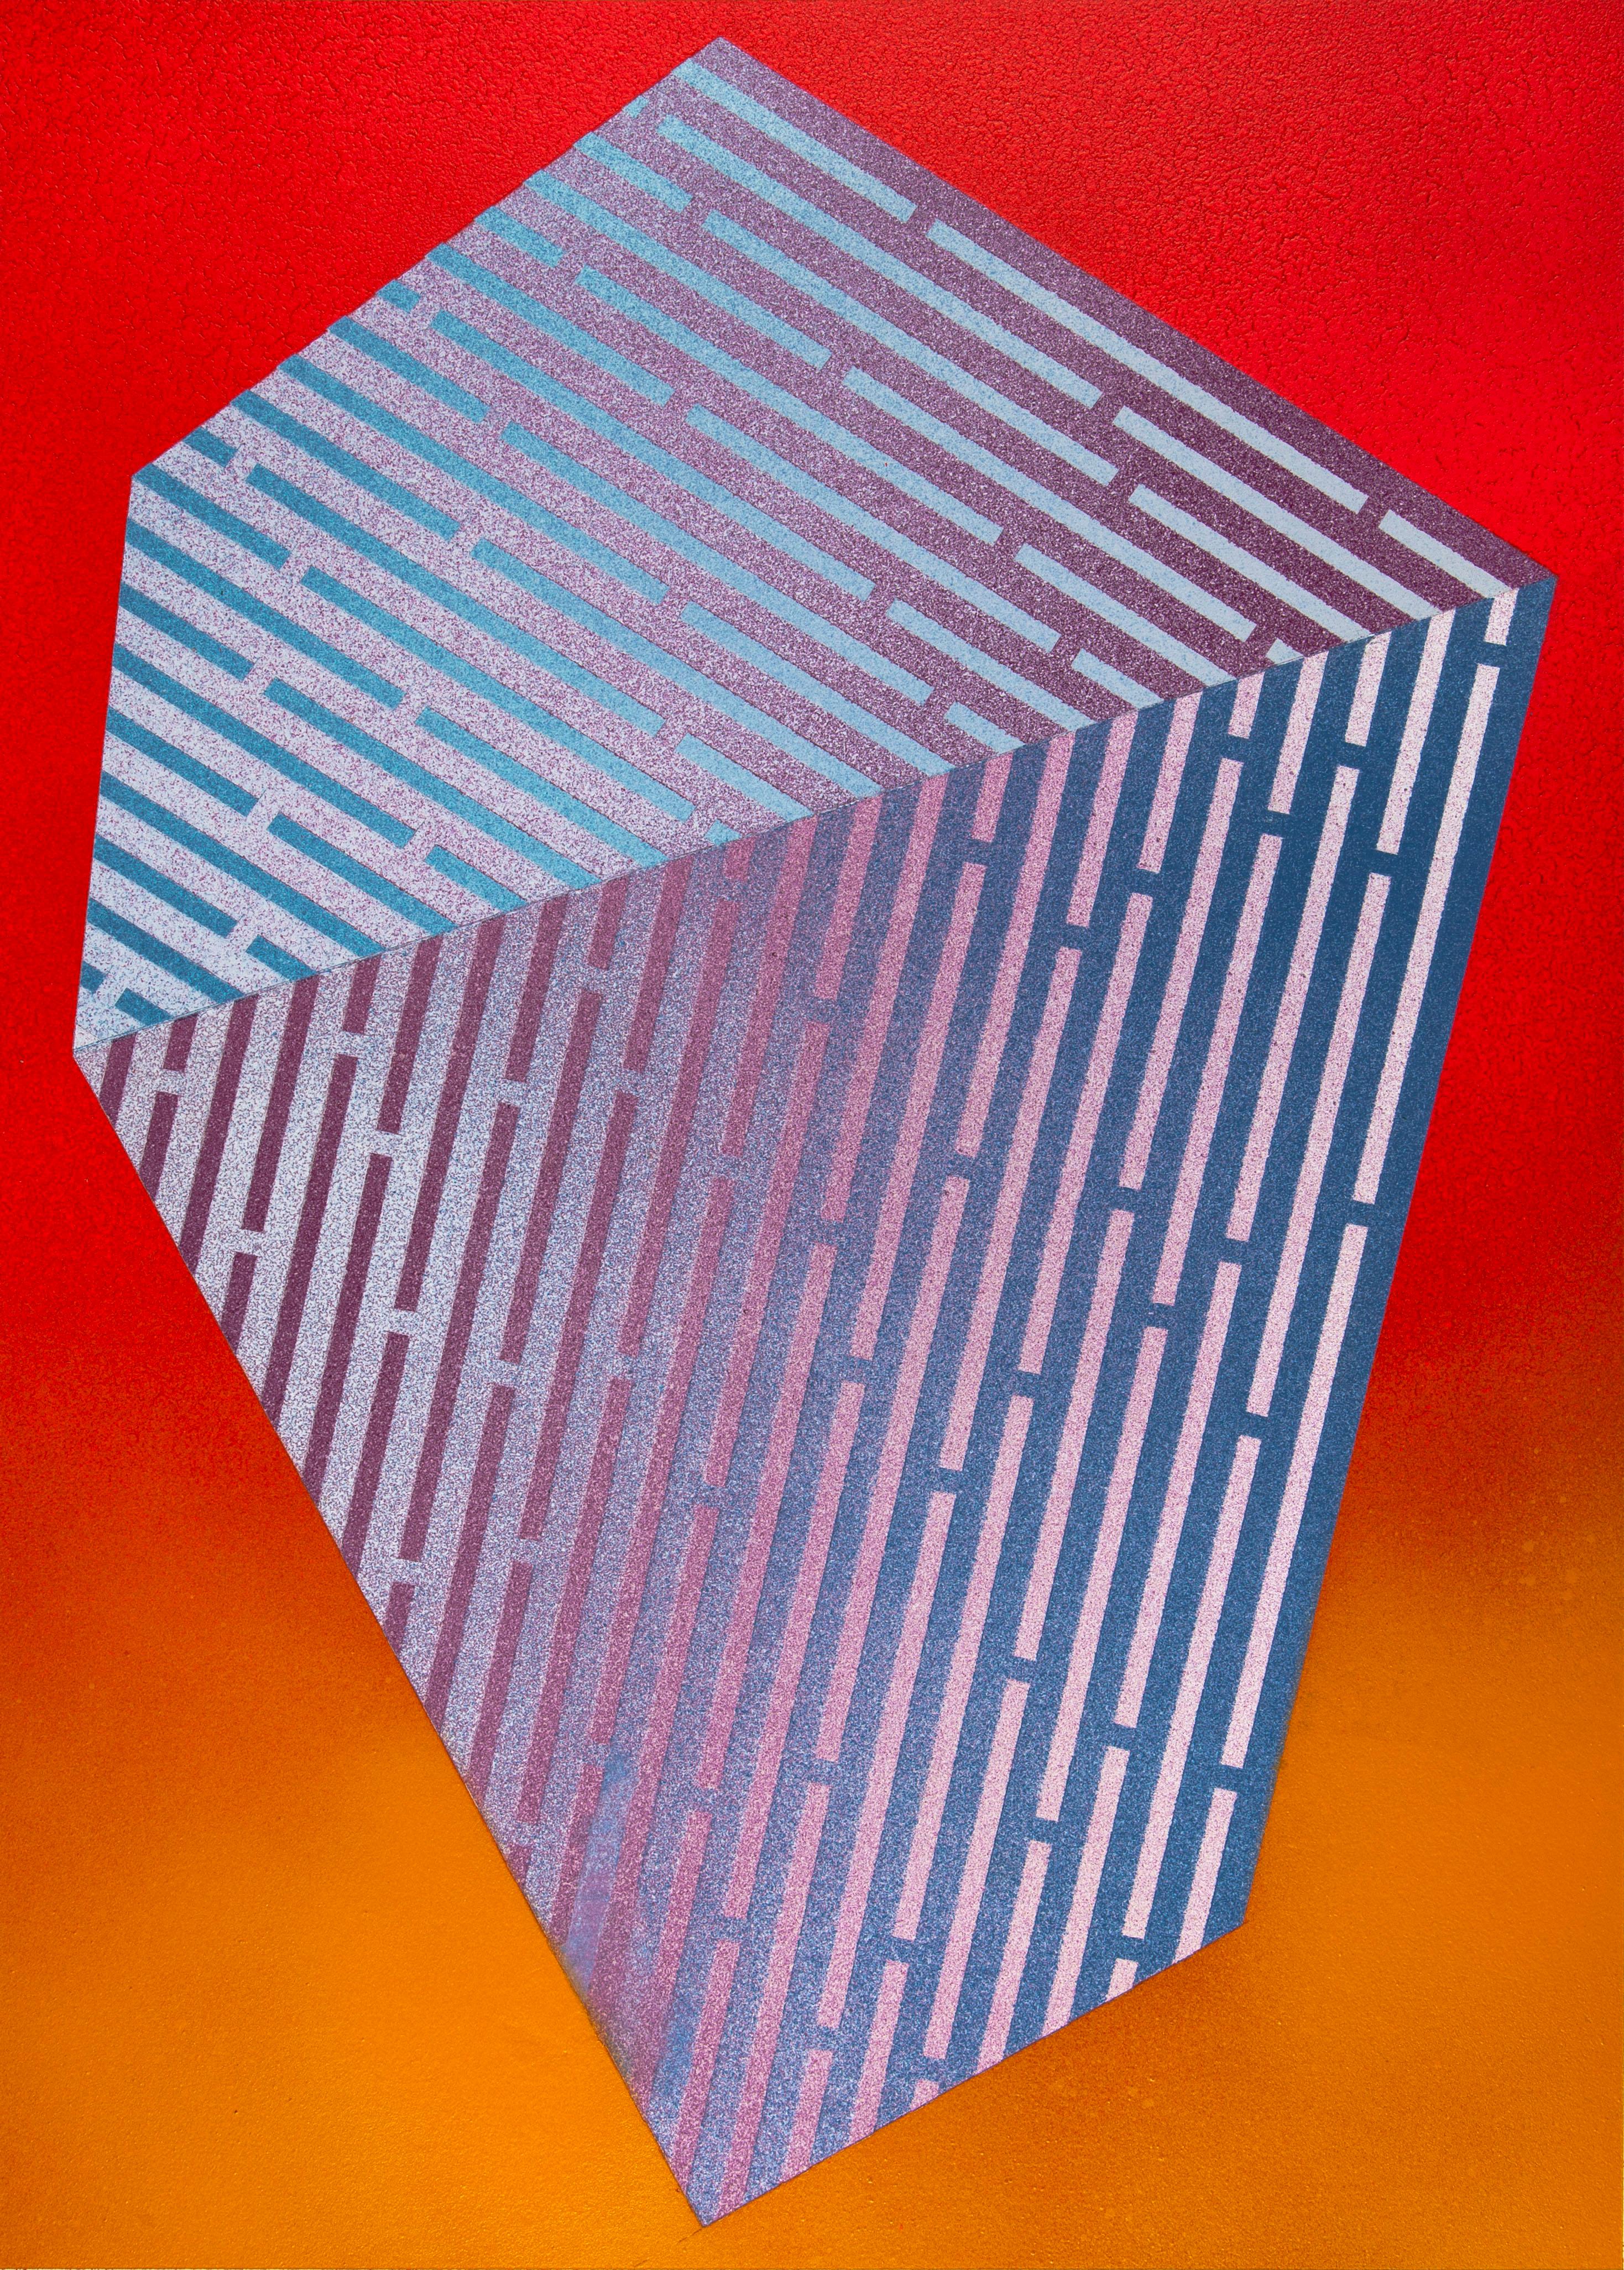 Jay Walker Figurative Painting - Luminescent Polygon XII: geometric abstract painting; red & purple line patterns